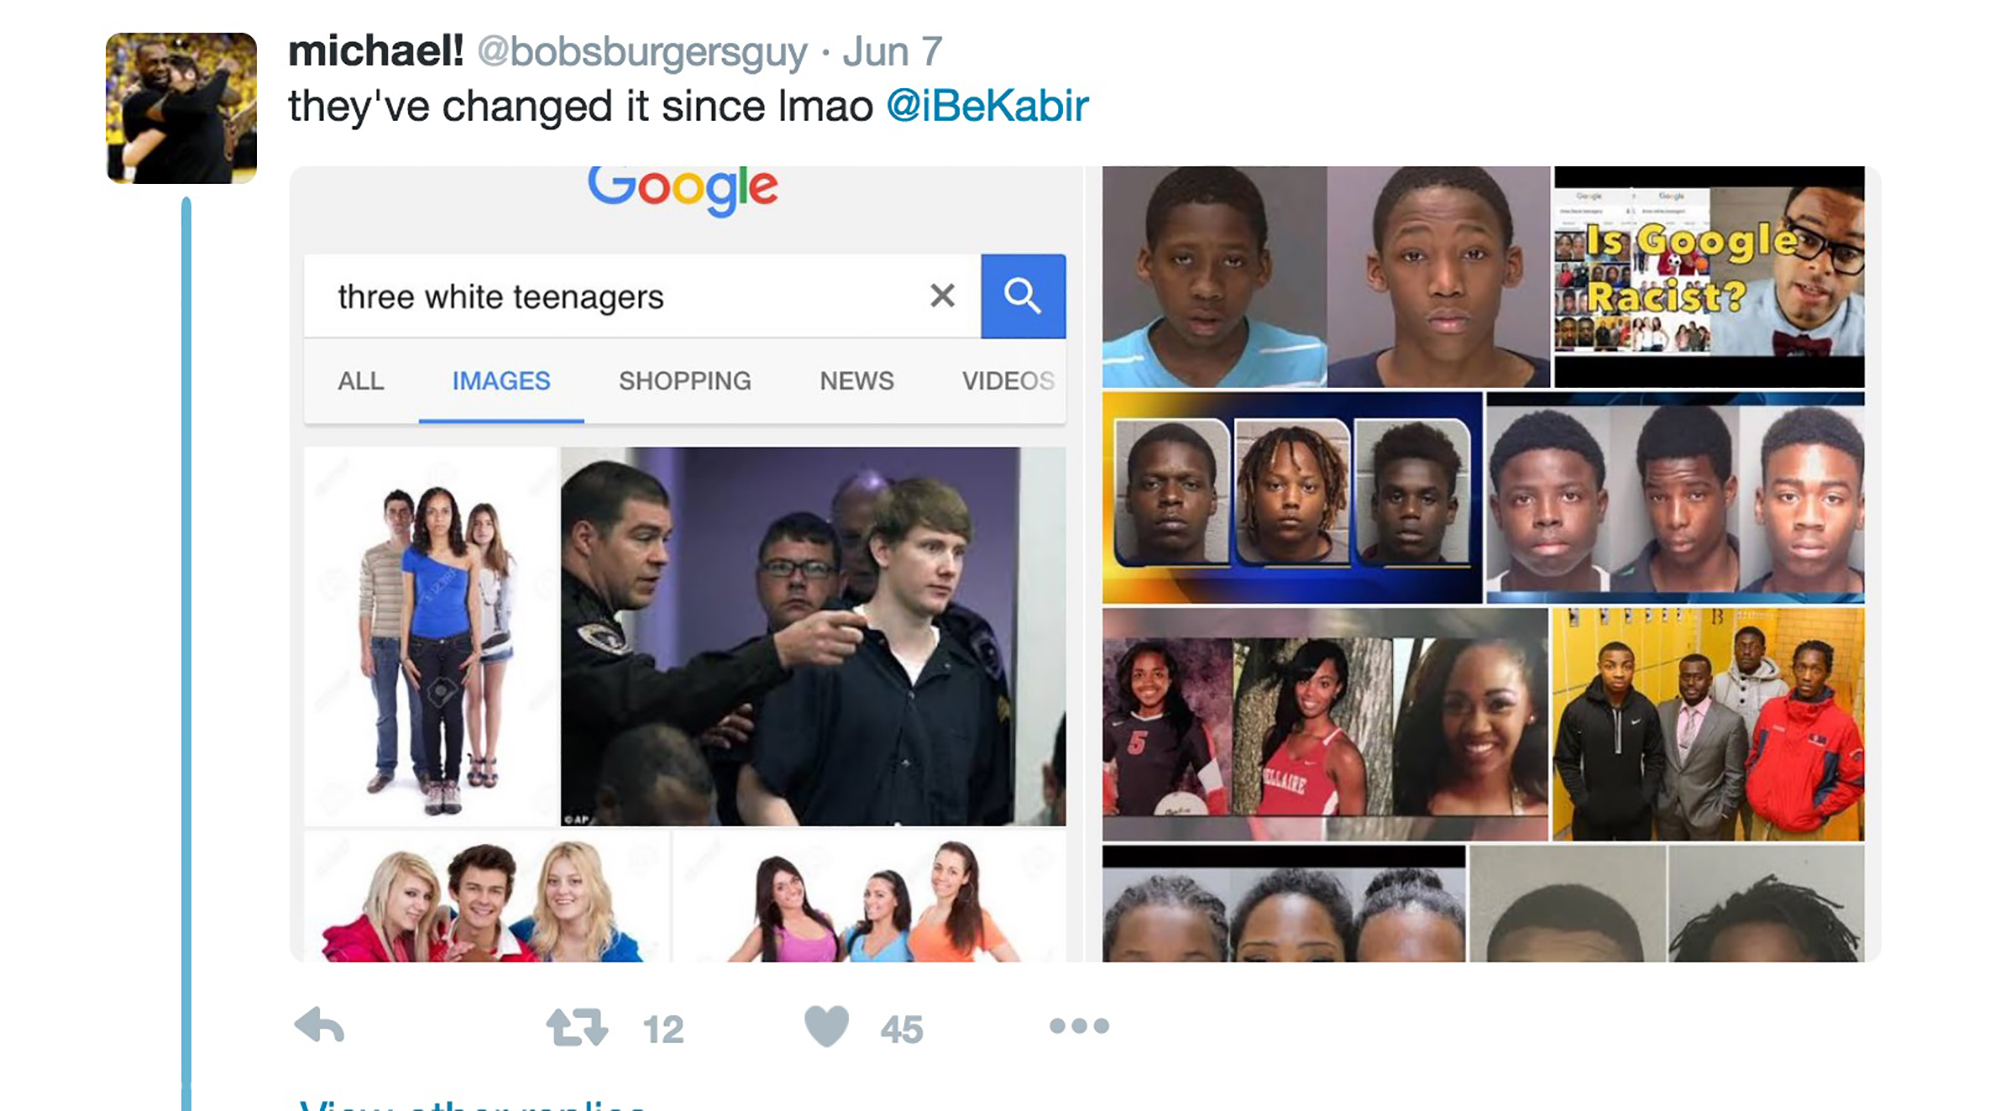 Kabir Ali’s tweet about his searching for “three white teenagers” shows wholesome teens in stock photography. (Courtesy Safiya Noble)